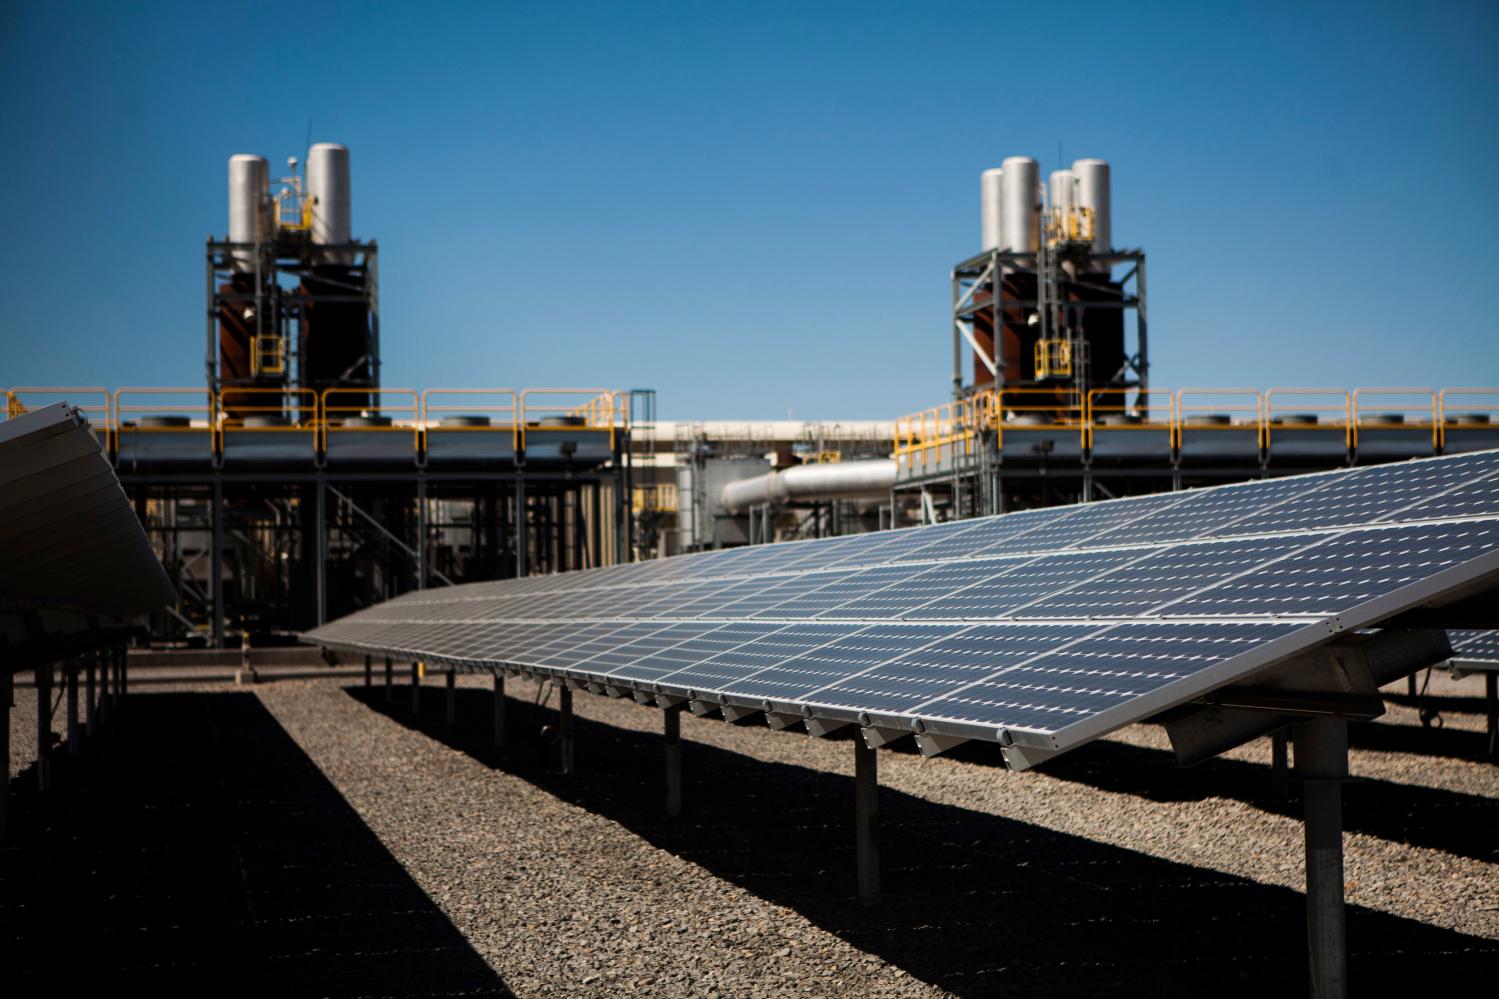 Solar panels are seen in front of a natural gas power plant at the Tahoe-Reno Industrial Center in McCarran, Nevada, September 16, 2014. This industrial site is where Elon Musk's electric car maker Tesla Motors plans to build a $5 billion factory to produce lithium ion batteries for electric cars, helped by more than $1 billion of incentives provided by Nevada. Tesla may employ 6,500 people at the new plant. In the past three years, 50 companies have moved to this area, helping cut unemployment in half and restoring some life to the town of Reno. Picture taken September 16. To match Feature USA-RENO/TESLA REUTERS/Max Whittaker (UNITED STATES - Tags: BUSINESS TRANSPORT ENERGY) - RTR48LGZ